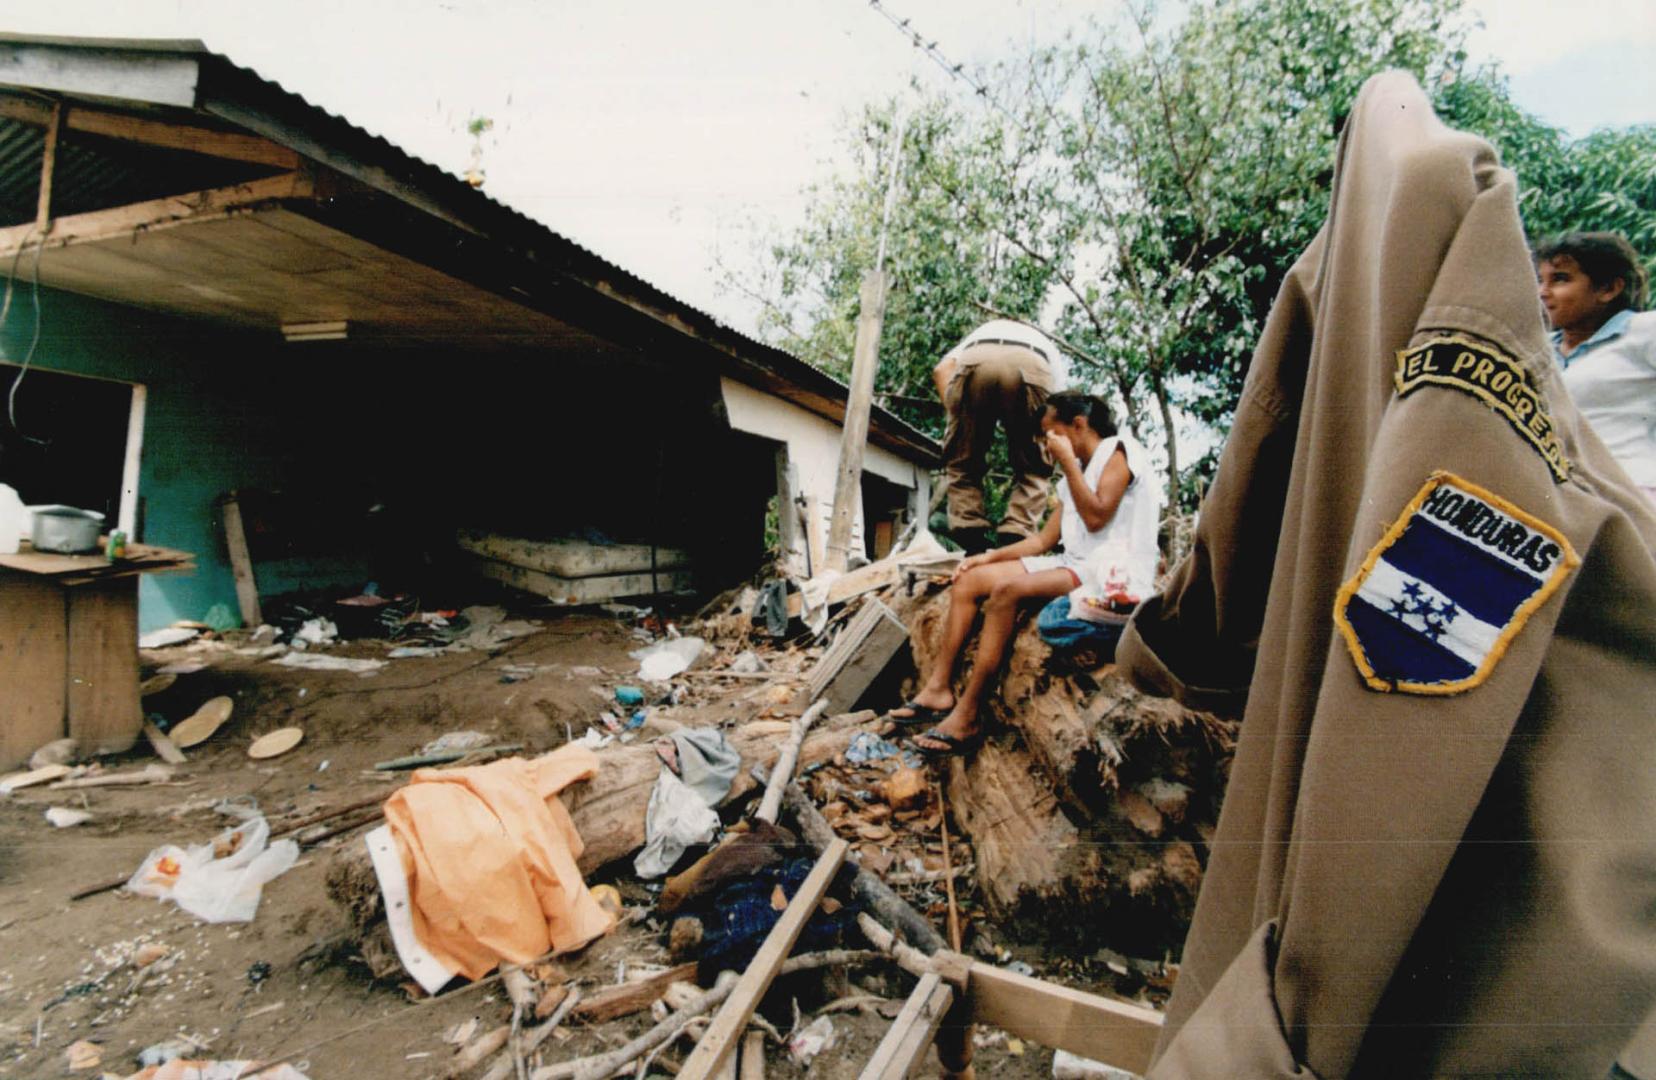 Open air family. Kid on bed. Taking a break from salvaging possessions Adolfo Miraldo sits on his parents bed. The family sleeps at the site to protect their things from looters